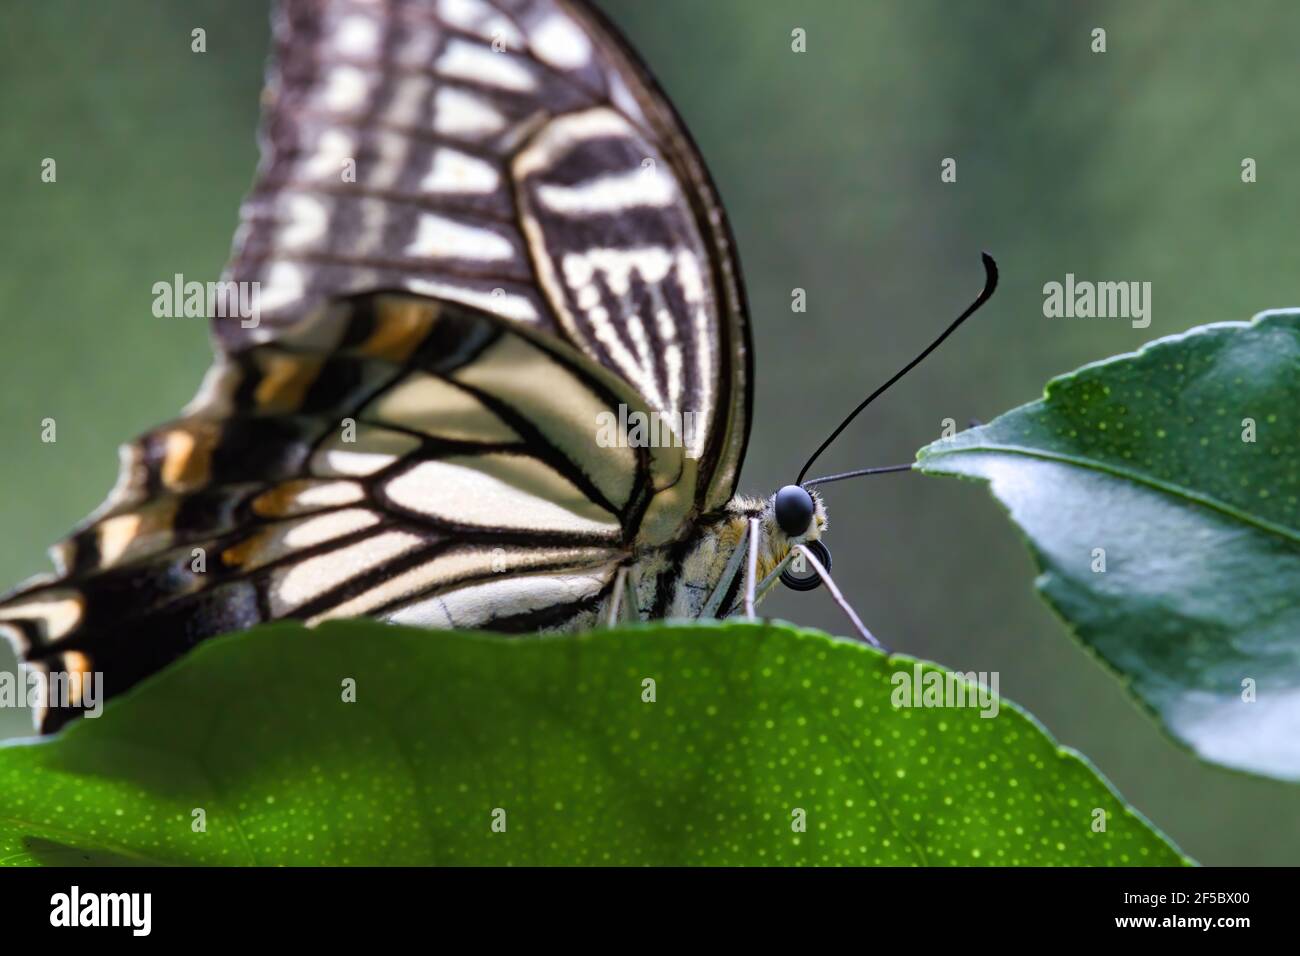 Detailed eye and head of a yellow swallowtail butterfly. Stock Photo